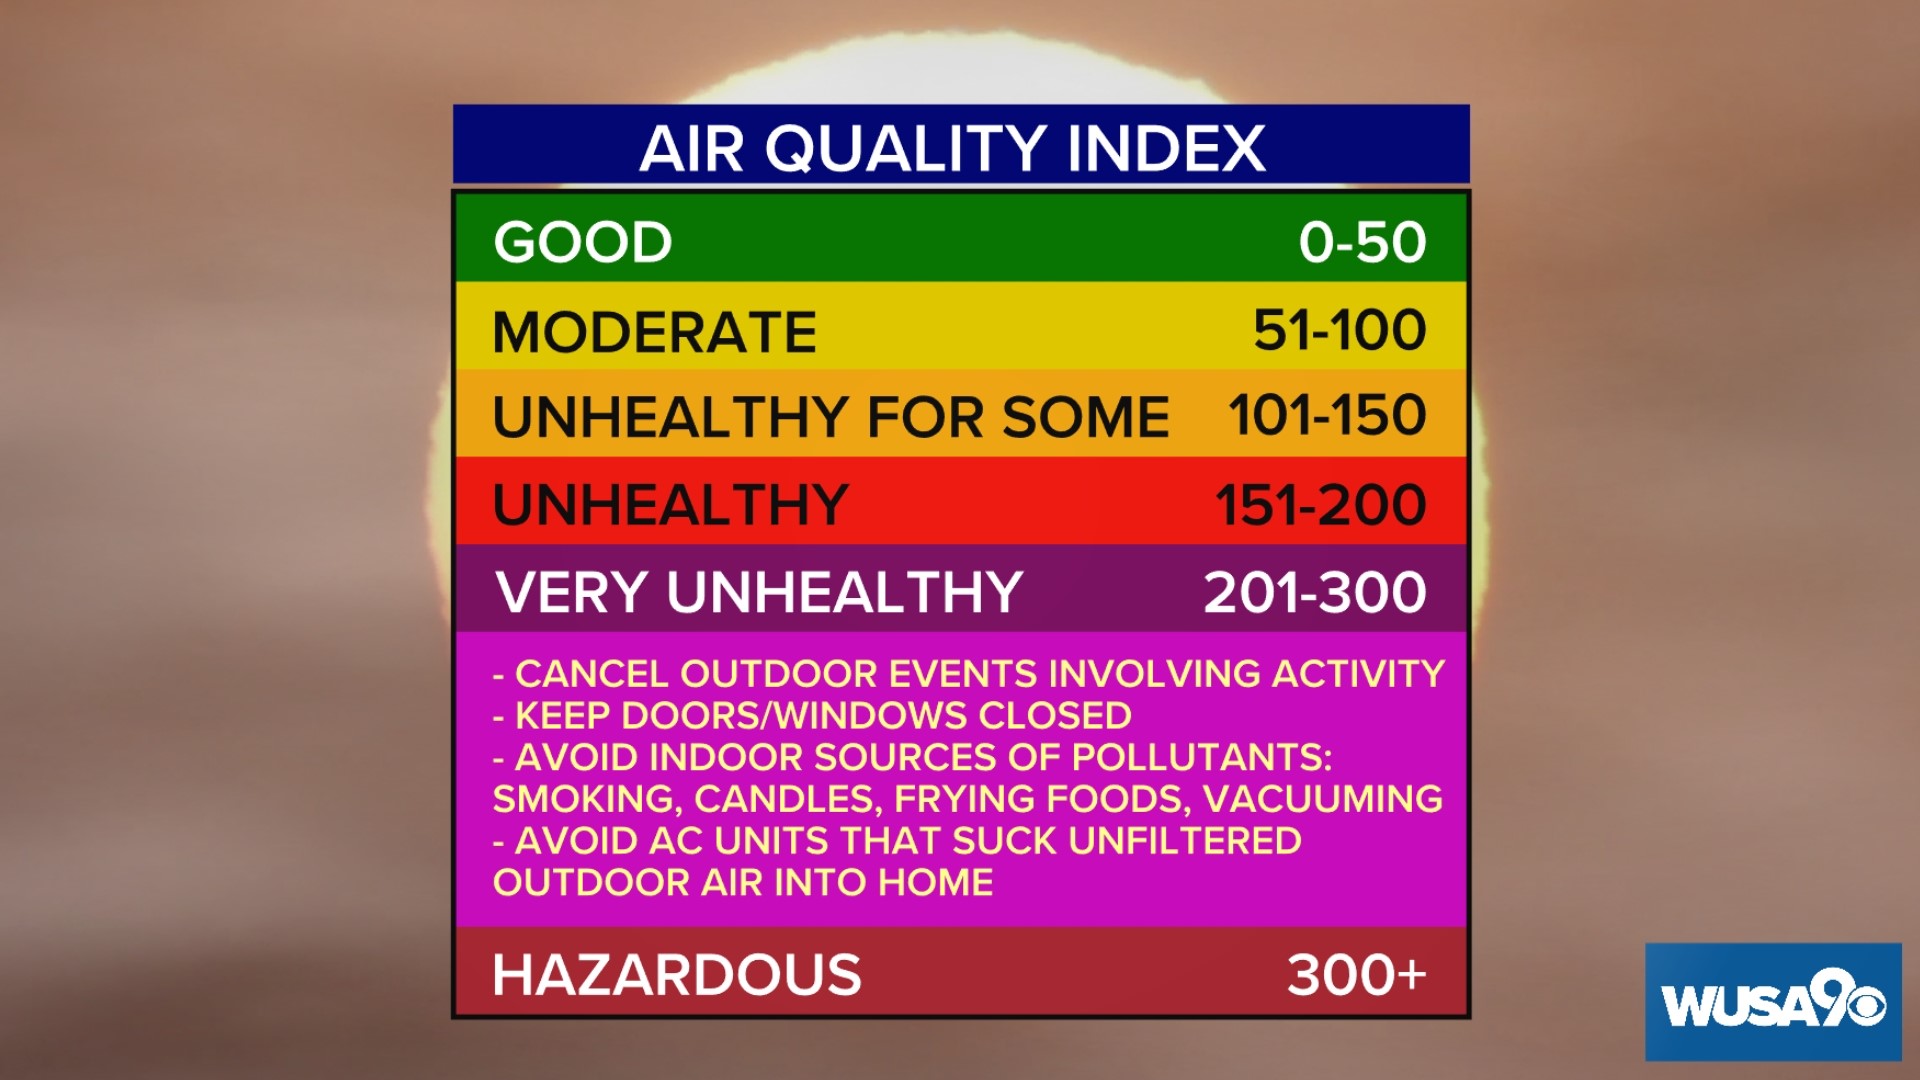 Air quality is impacted by wildfire smoke coming from Canada.